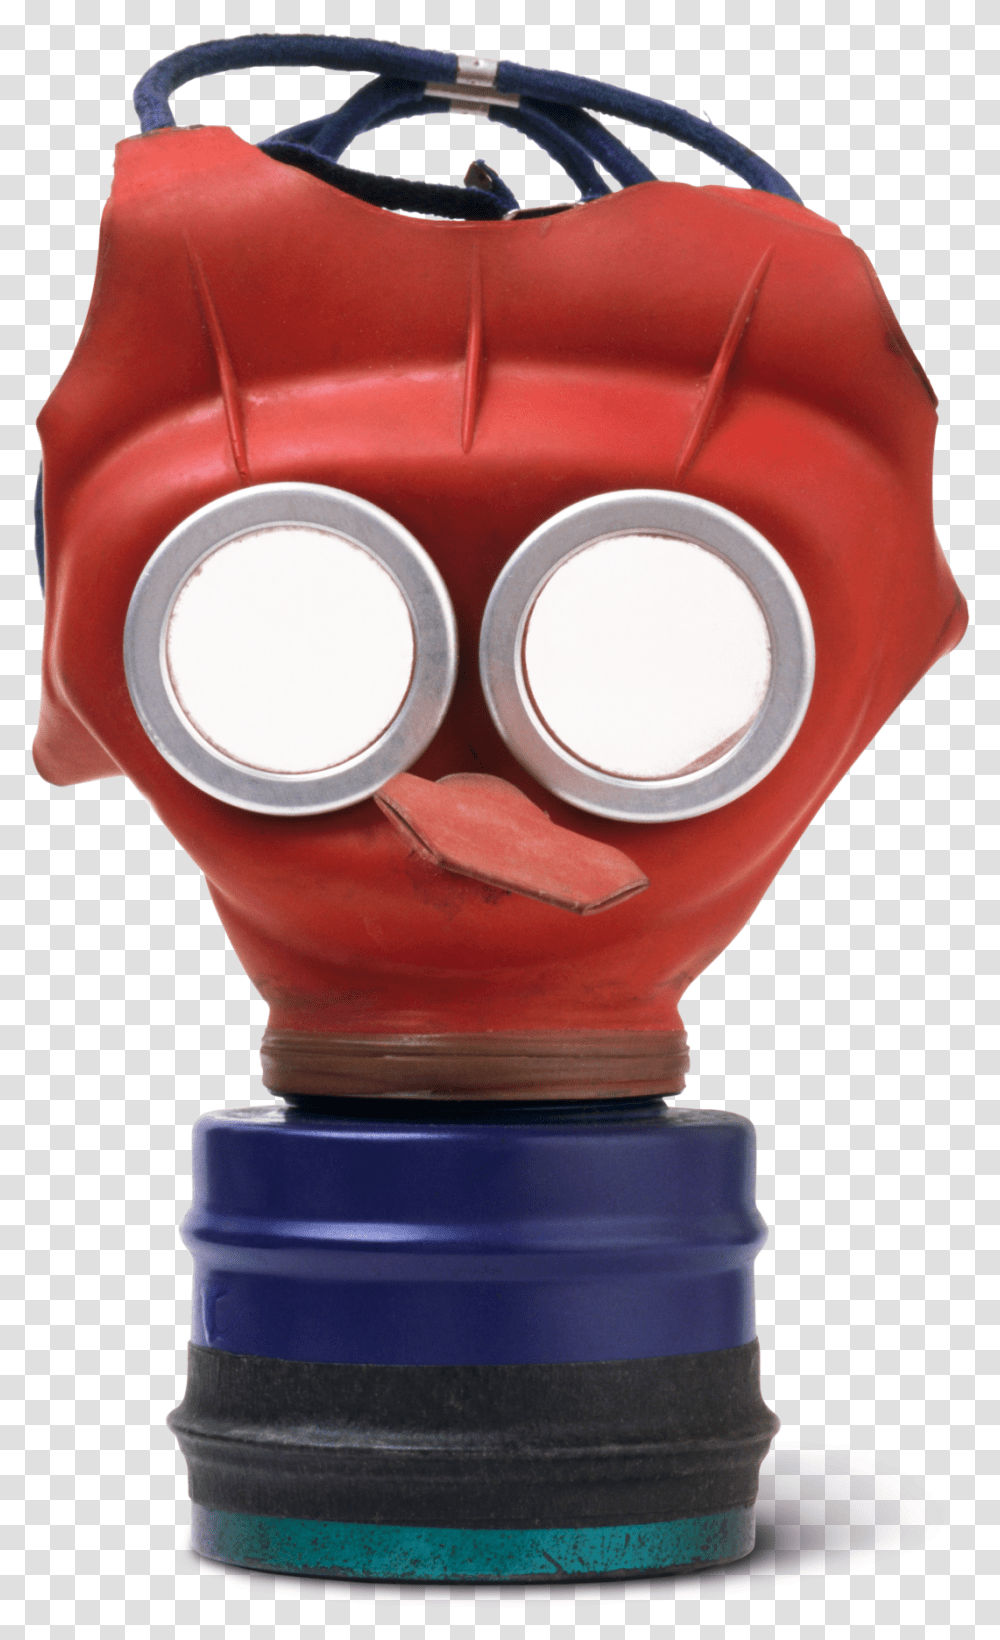 Gas Mask Soldier Dry Suit, Fire Hydrant, Sphere, Light Transparent Png